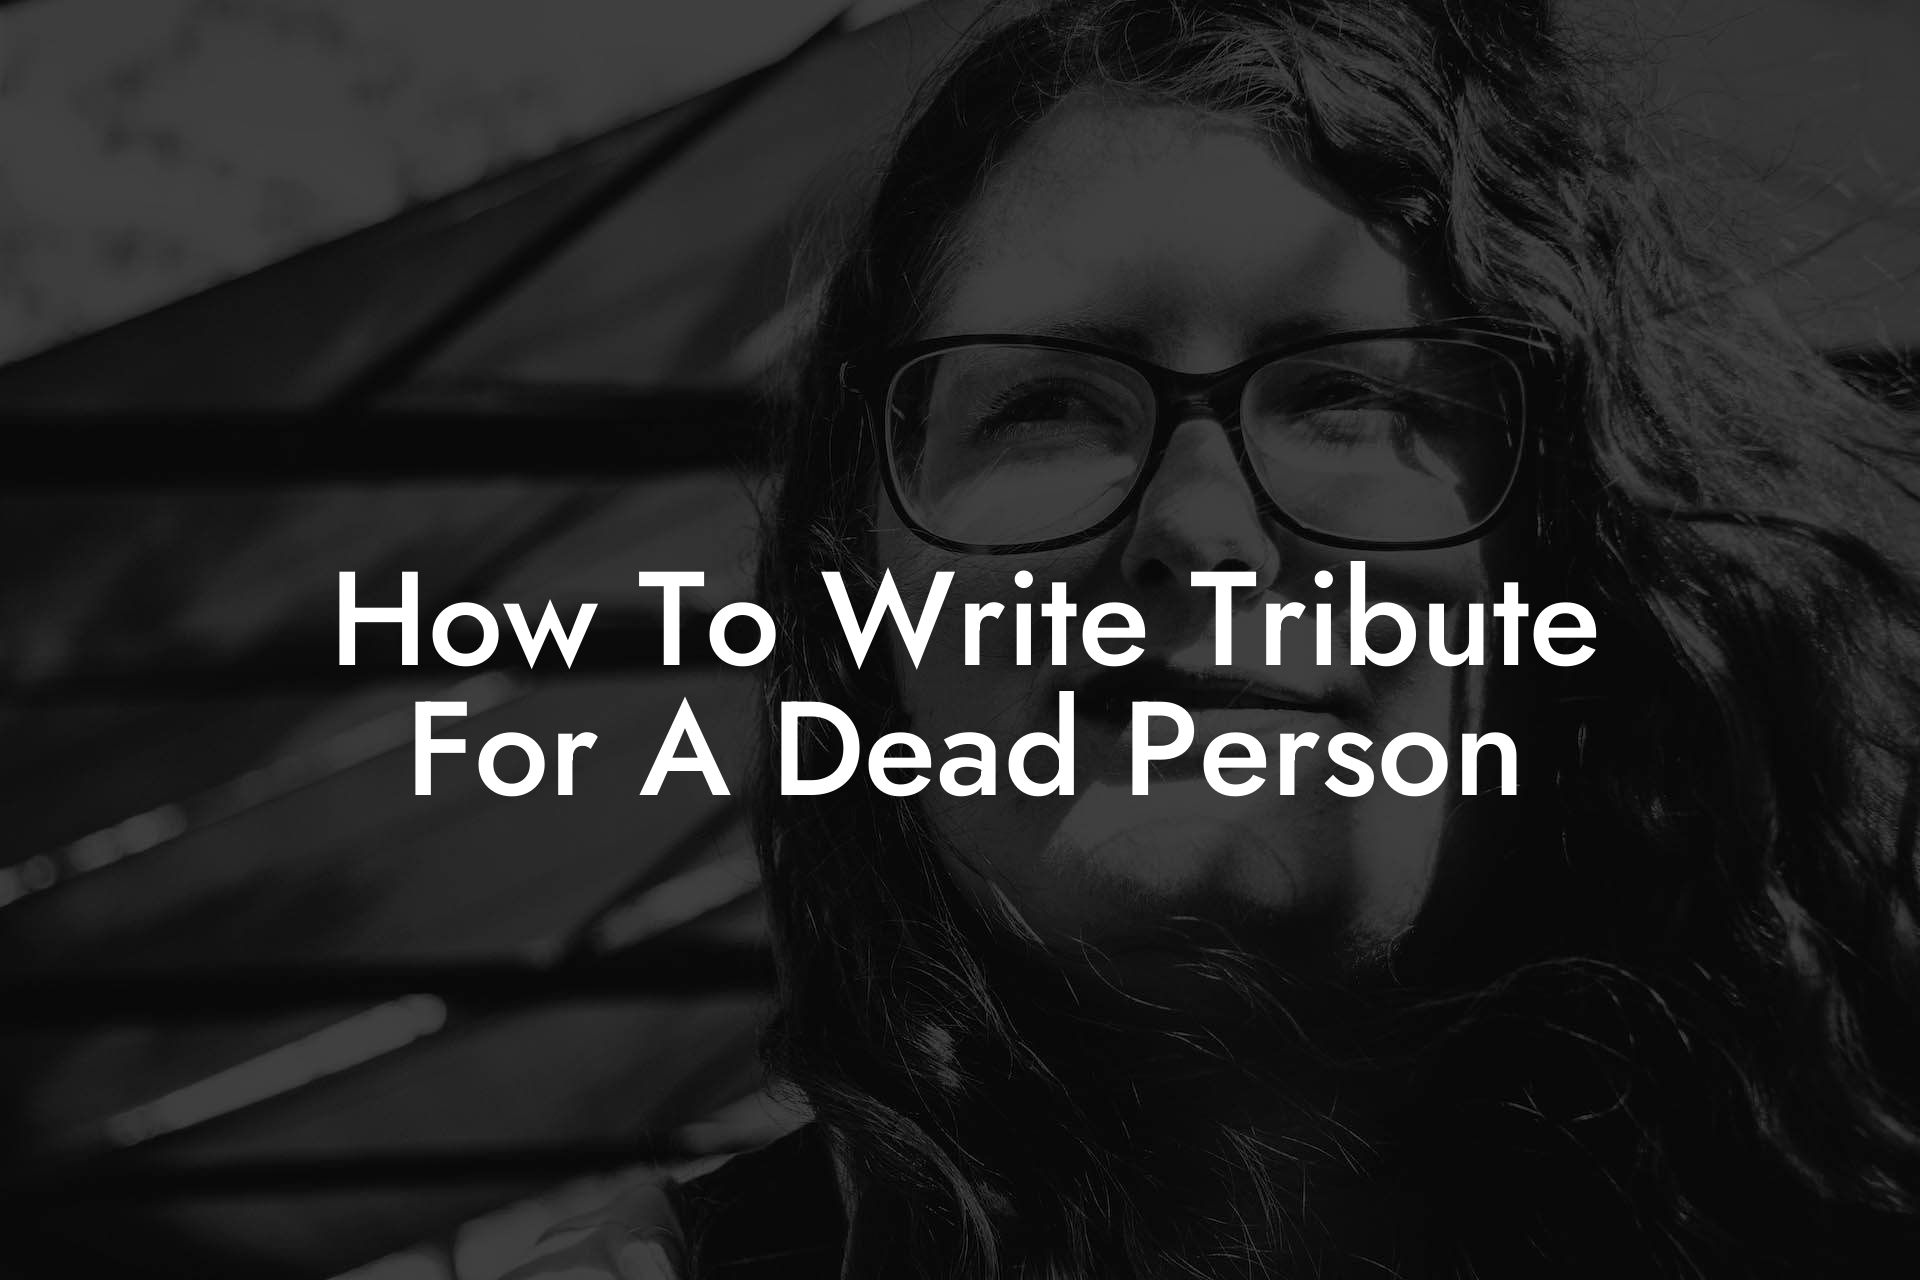 How To Write Tribute For A Dead Person